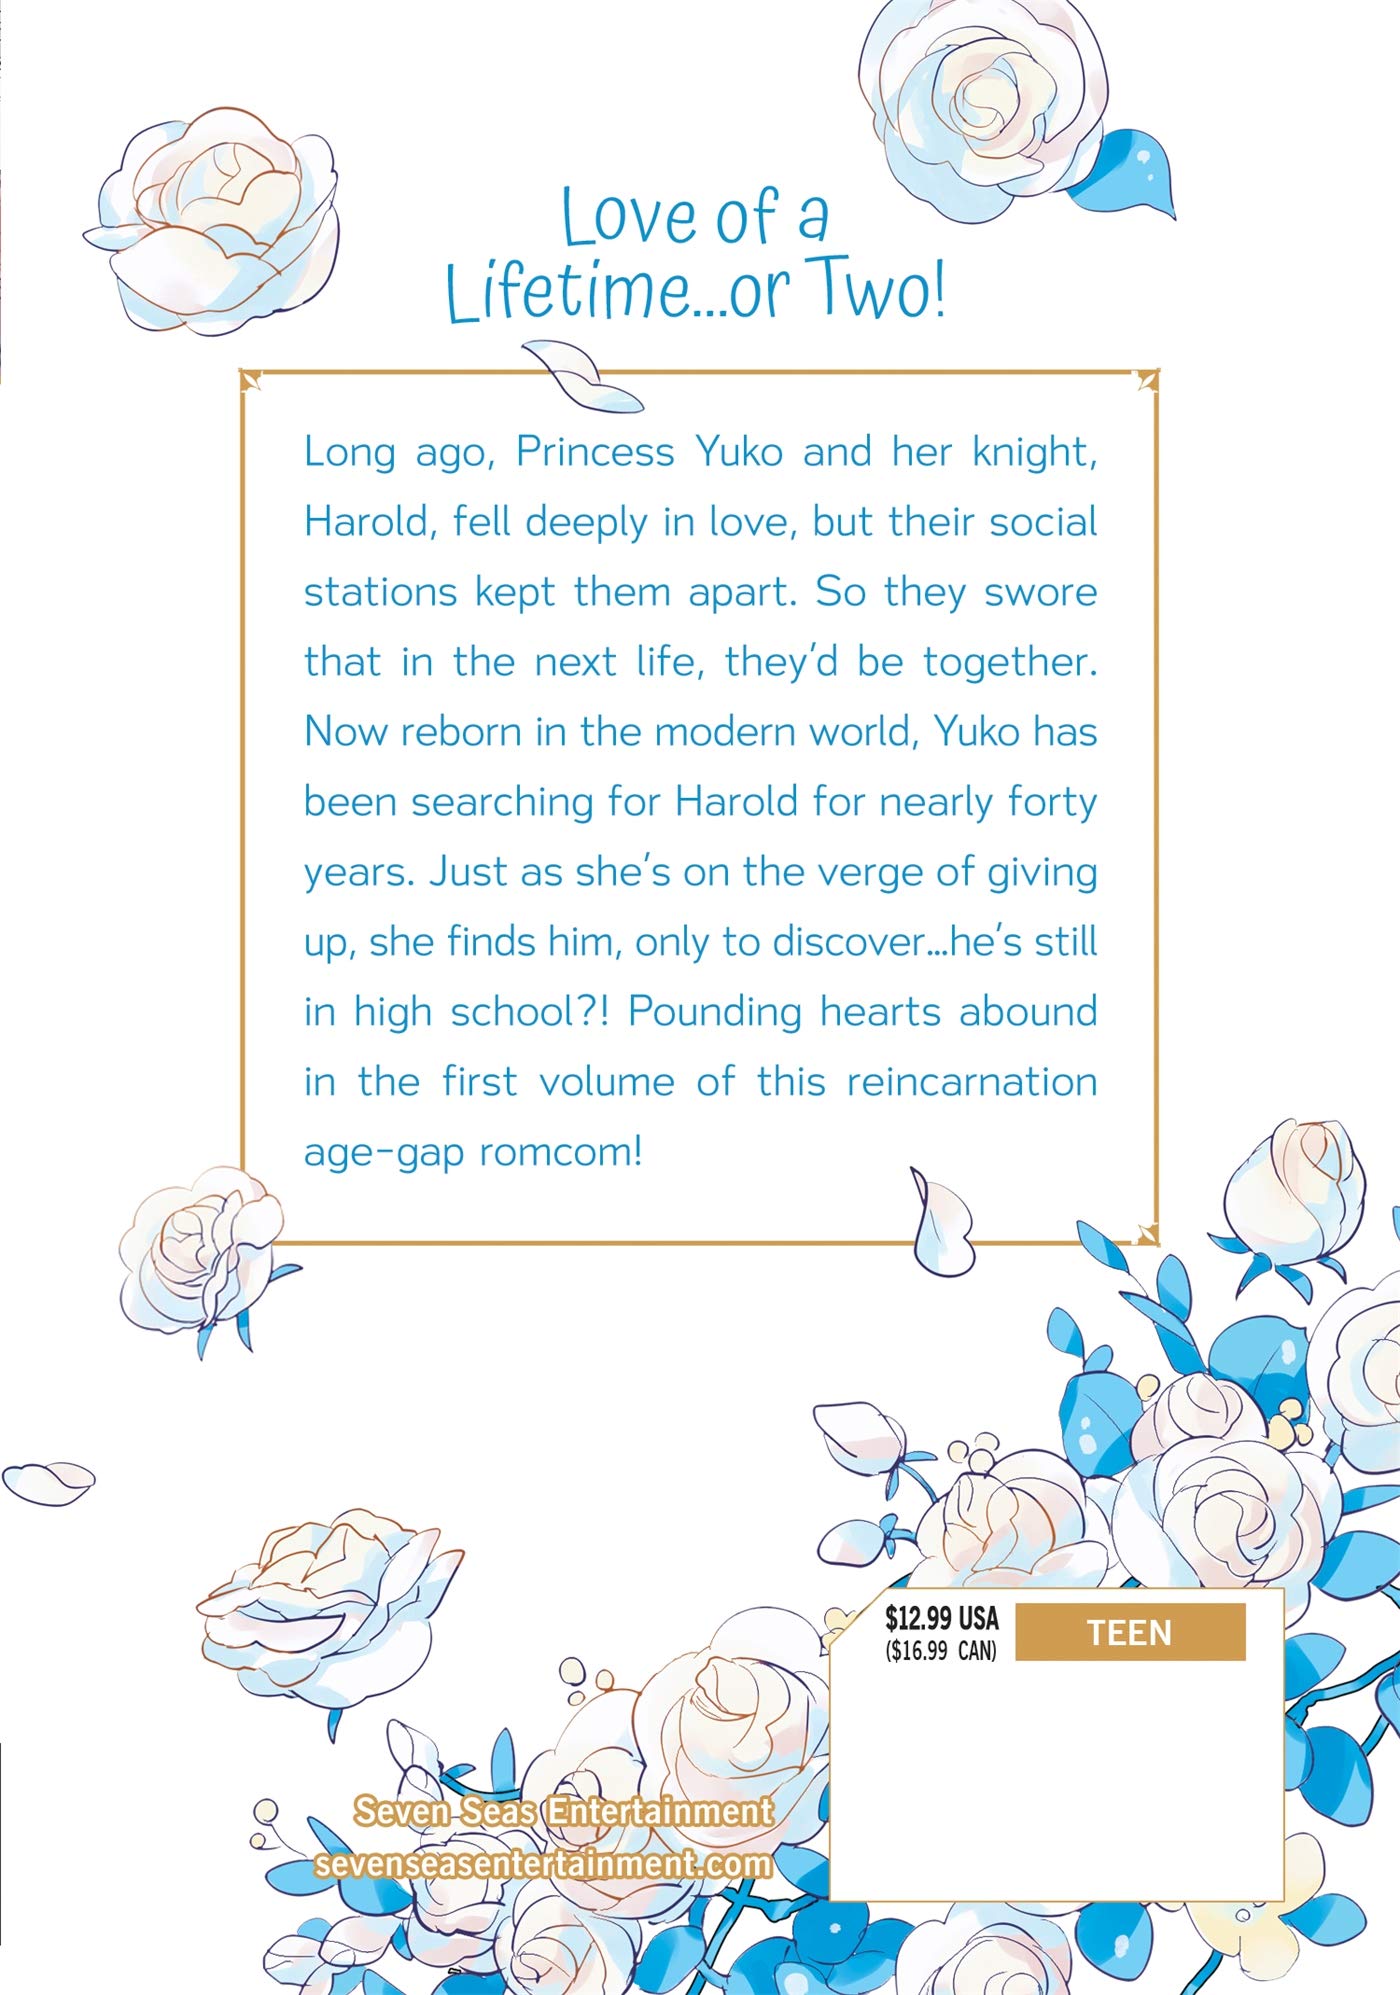 We Swore to Meet In the Next Life and That’s When Things Got Weird! - Volume 1 | Hato Hachiya